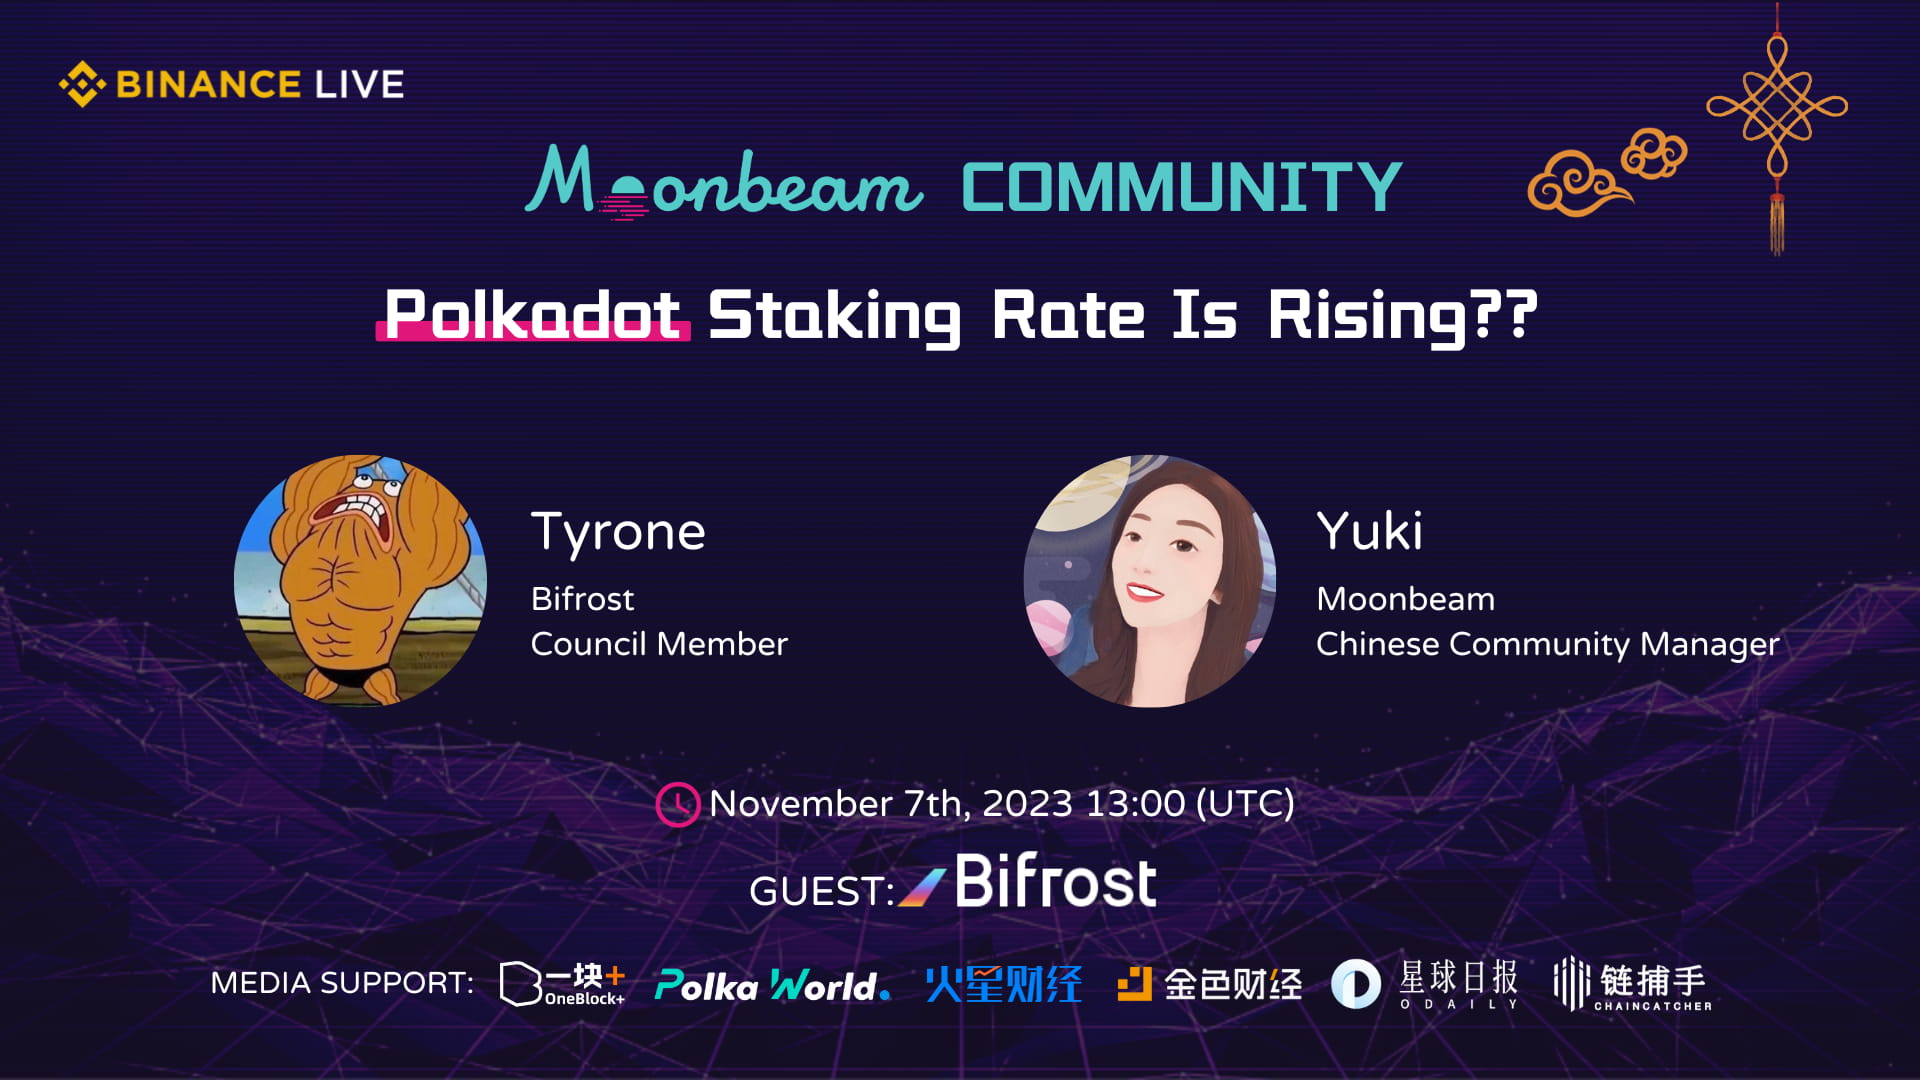 Polkadot Staking Rate Is Rising